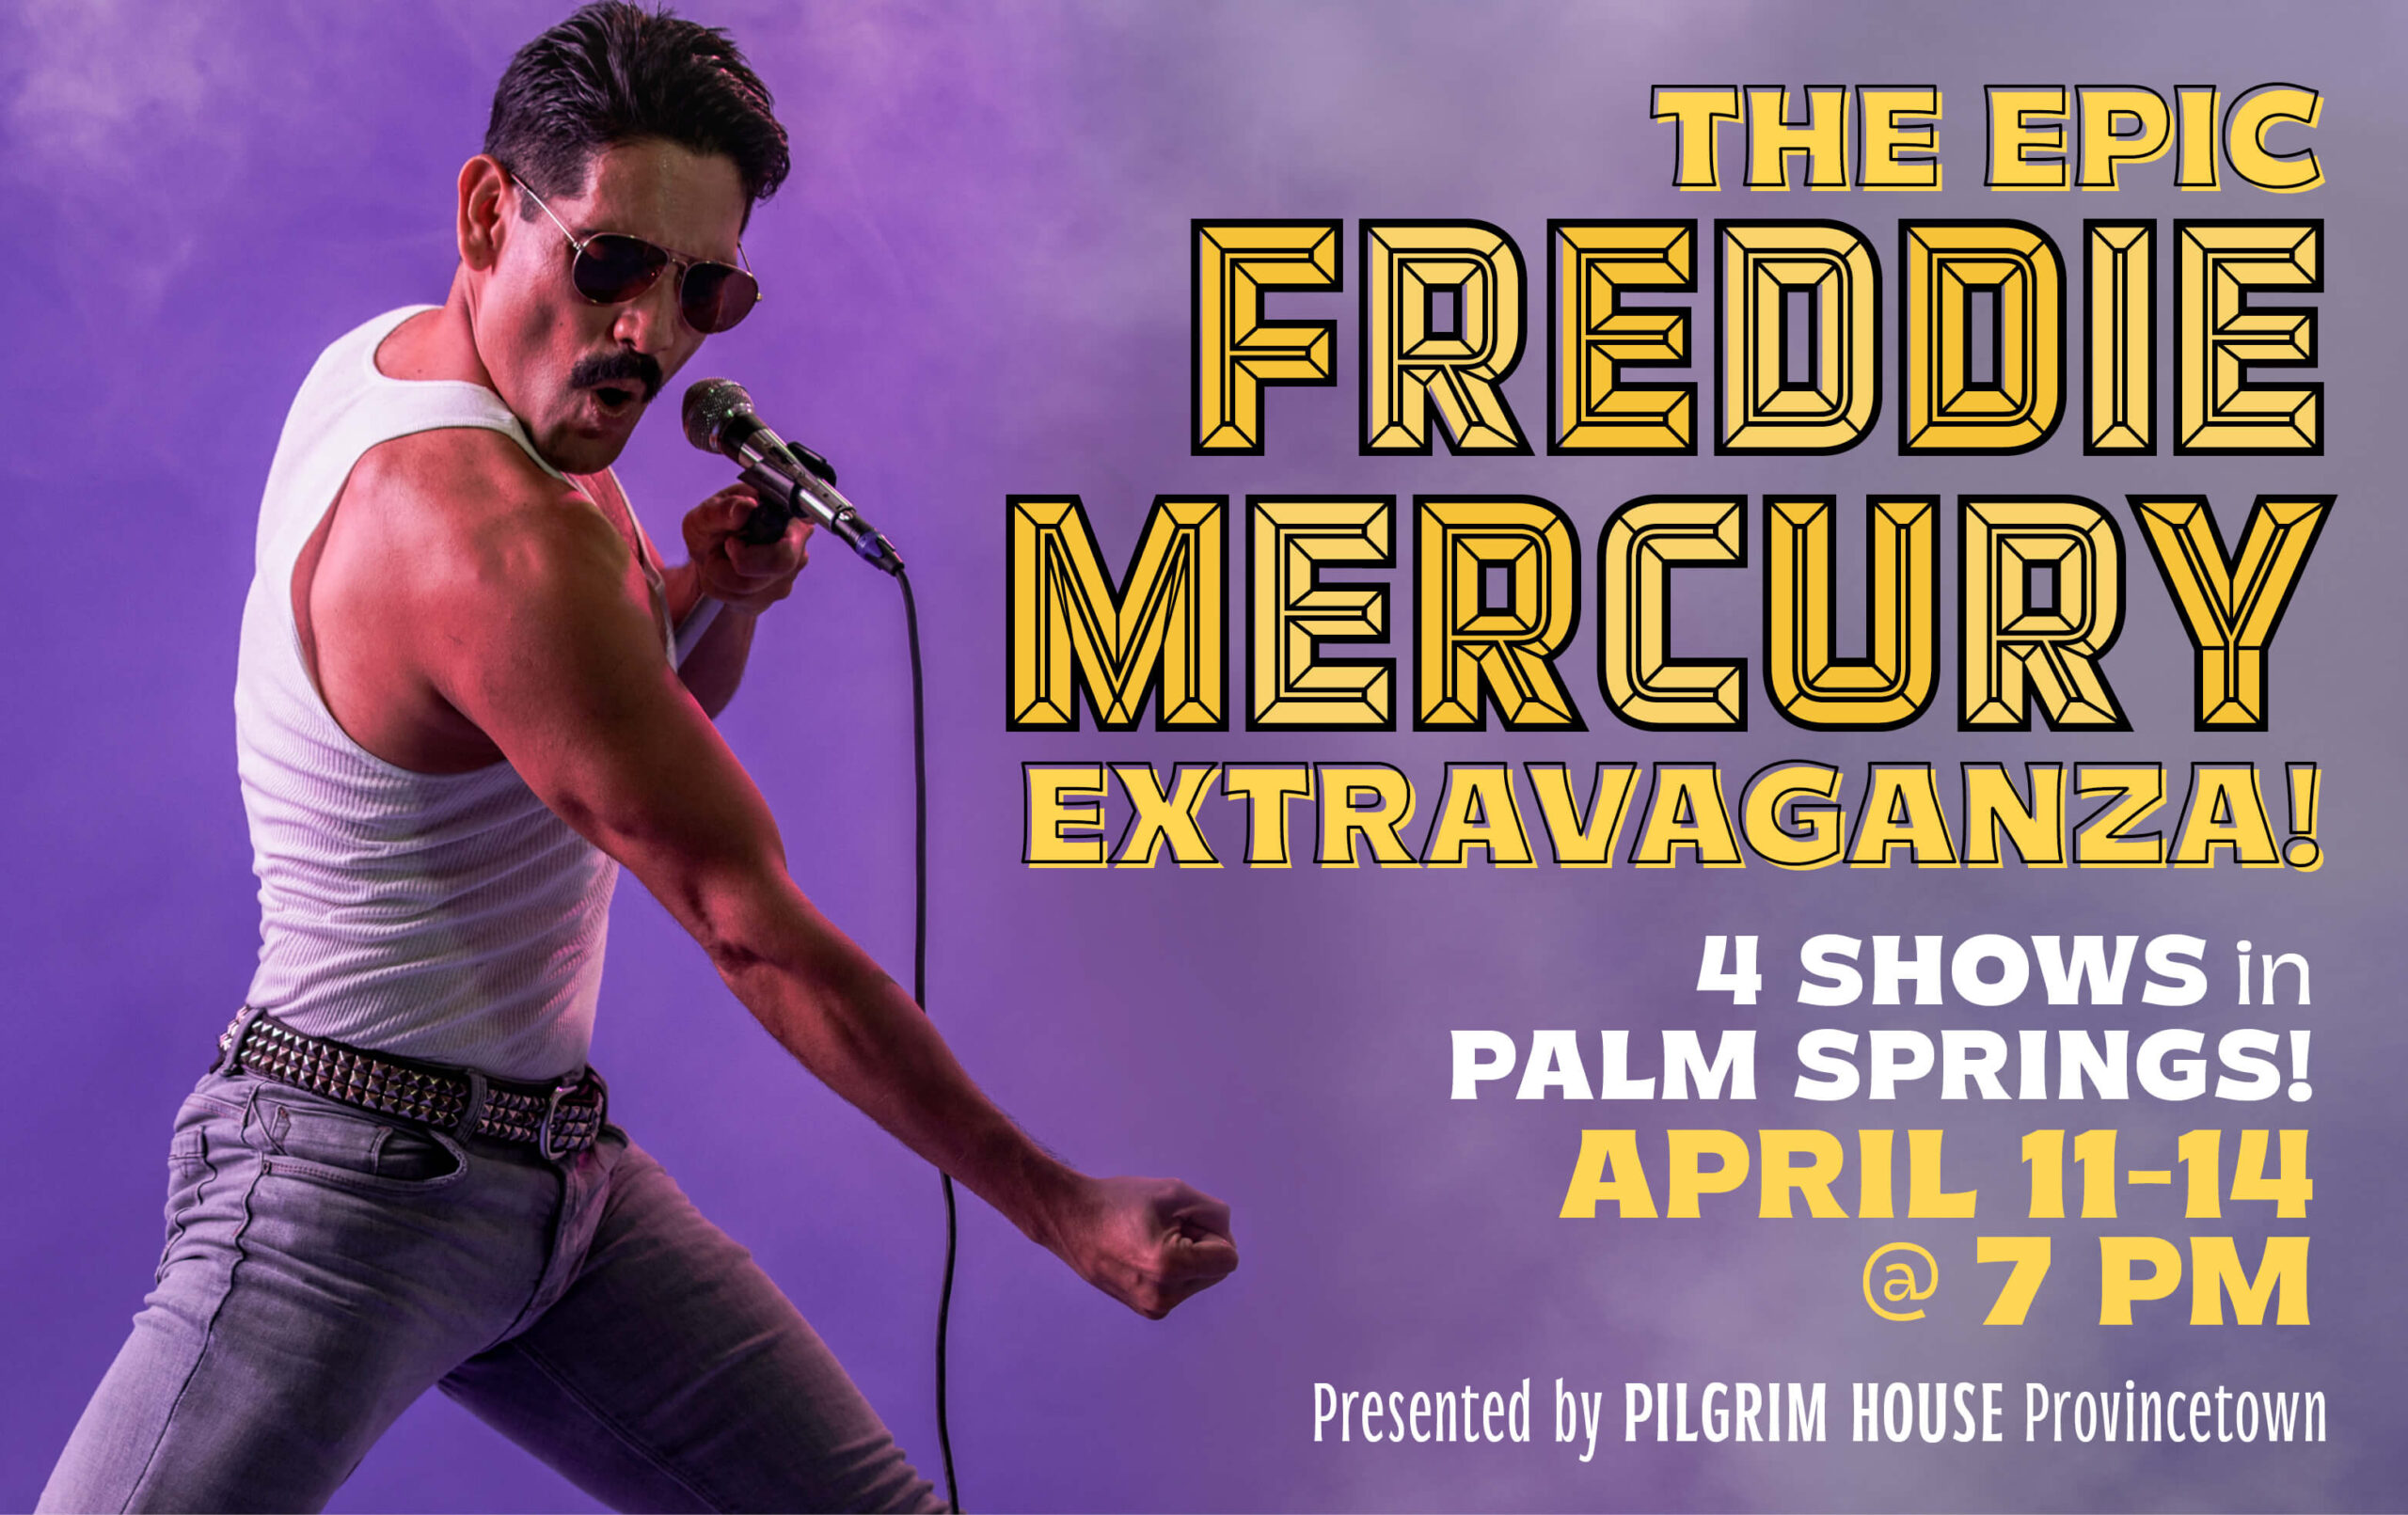 THE EPIC FREDDIE MERCURY EXTRAVAGANZA at Fuego Event Space Palm Springs